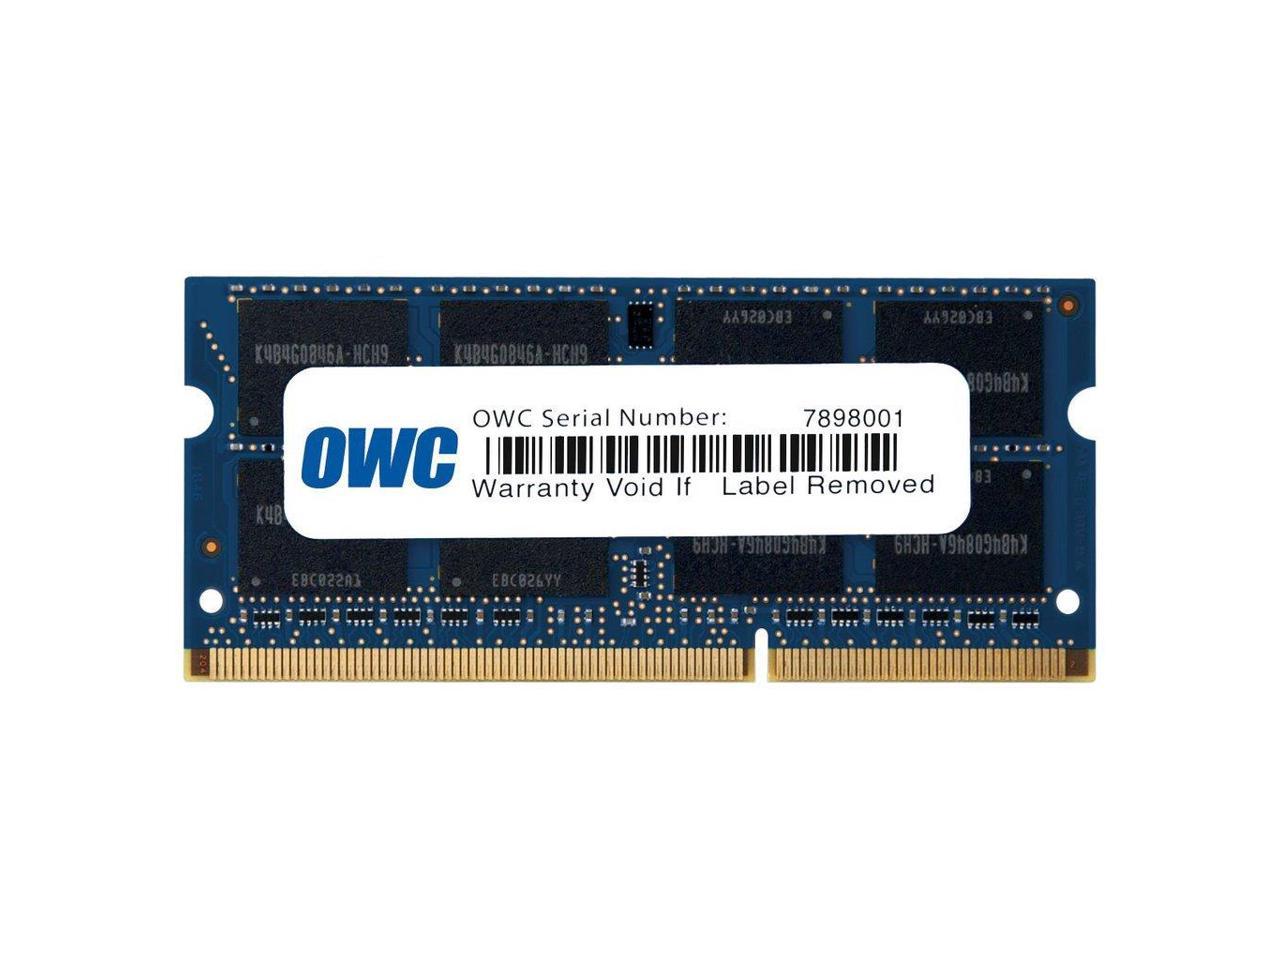 OWC 16.0GB (2x 8GB) PC3-12800 1600MHz Memory Upgrade Kit For 2011-15 iMac, 2012 MacBook Pro 13" & 15" models . Model OWC1600DDR3S16P